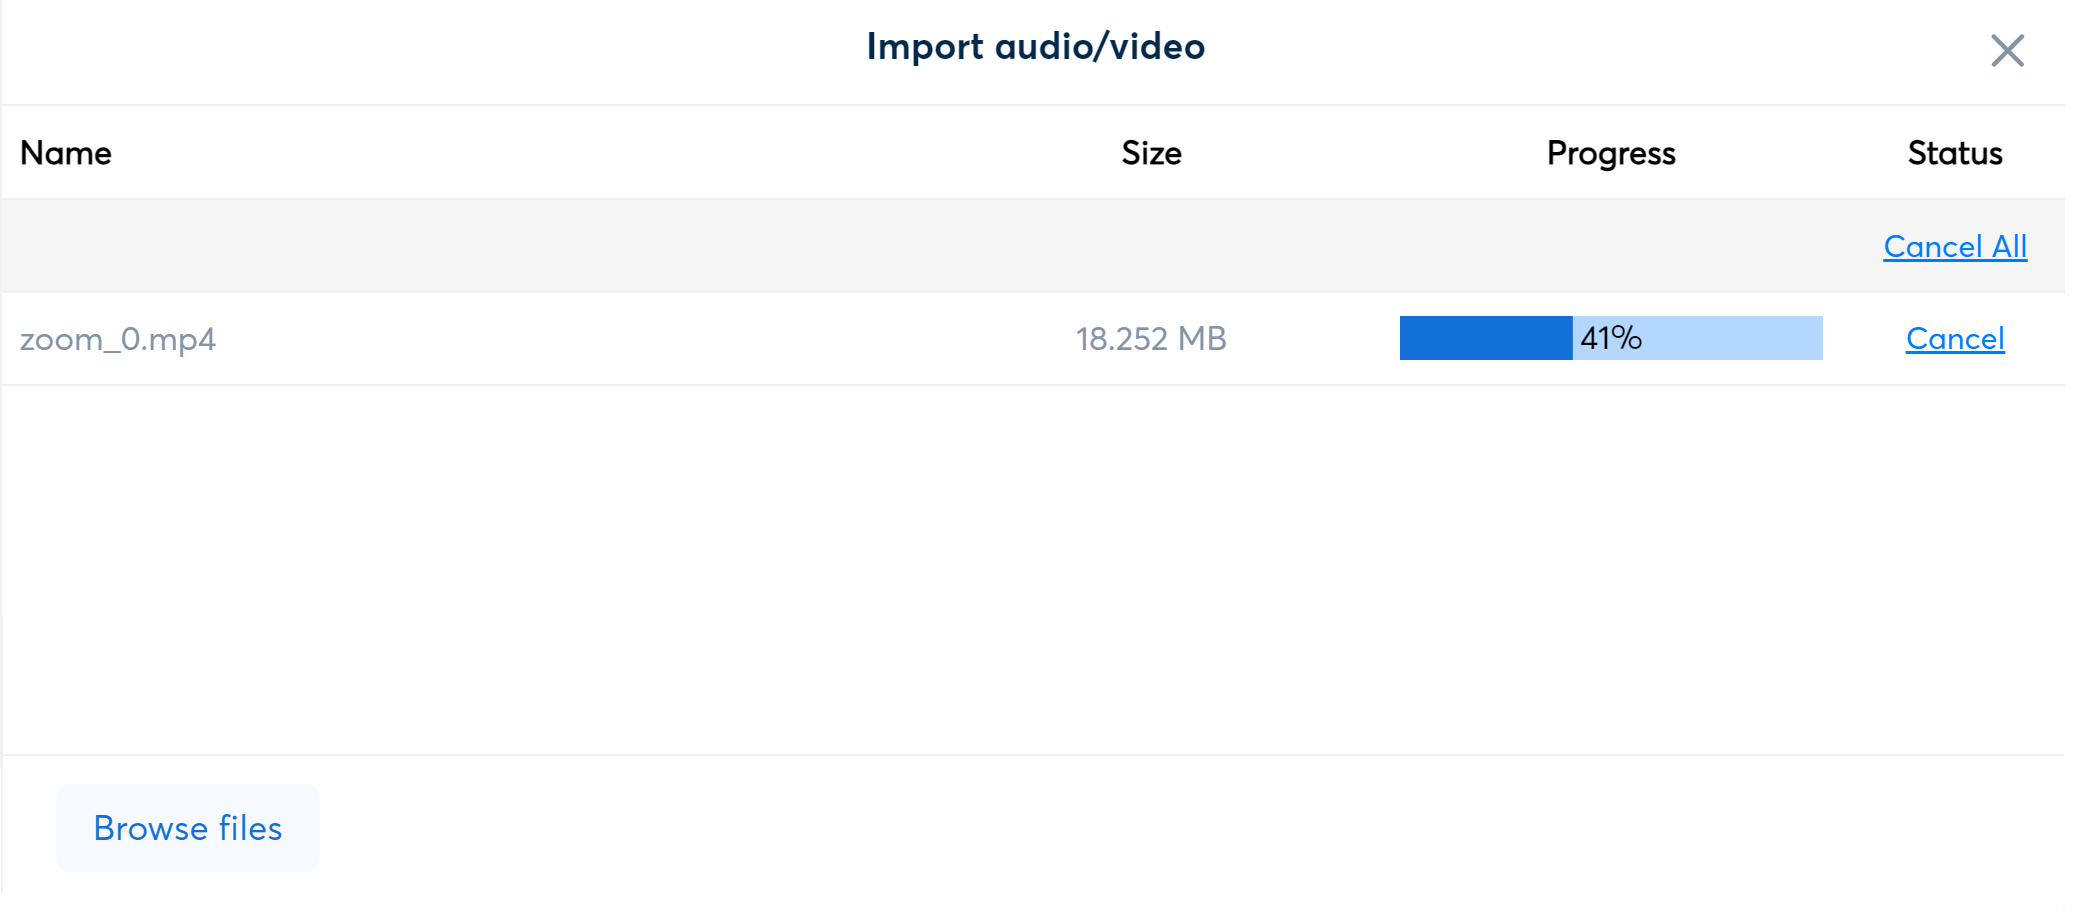 Screenshot of import window showing files being uploaded to otter.ai for transcription